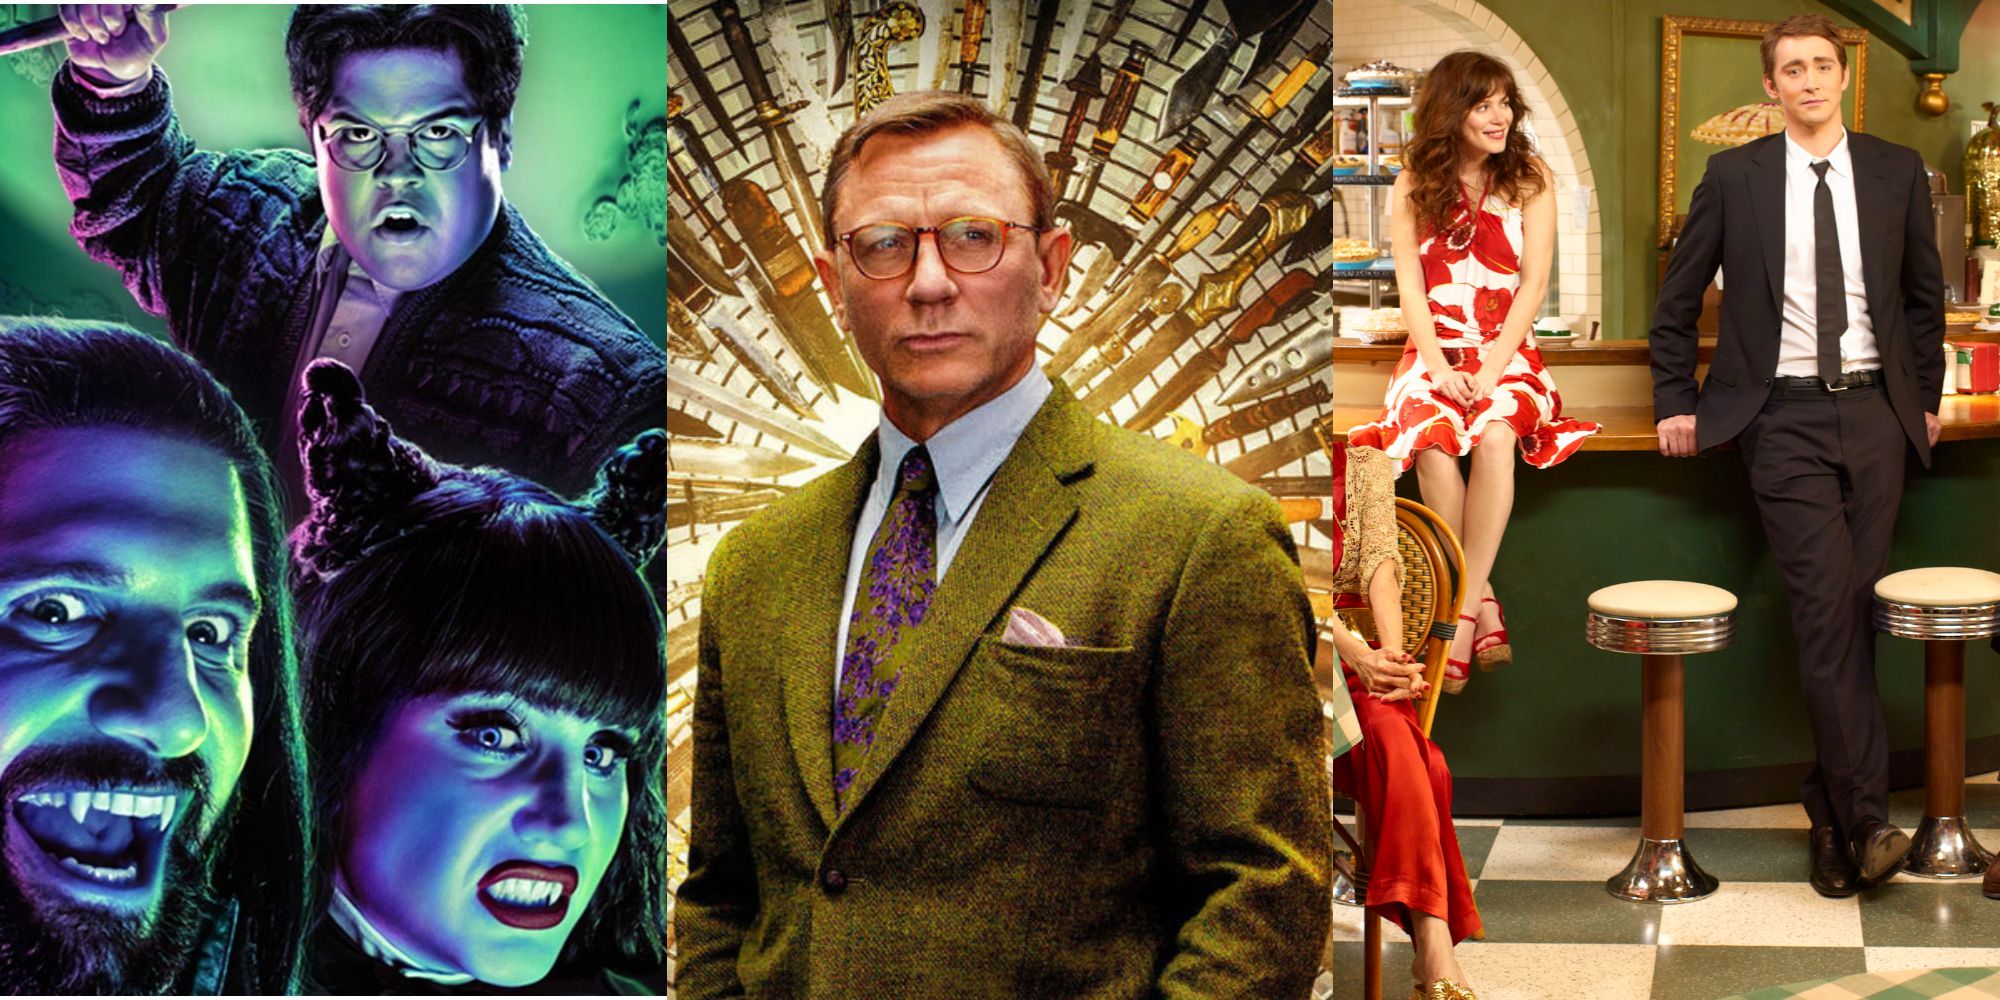 Split Image: What We Do In The Shadows promo photo; Daniel Craig in Knives Out standing in front of a chair made of knives pointing toward him; Pushing Daisies cast promo photo